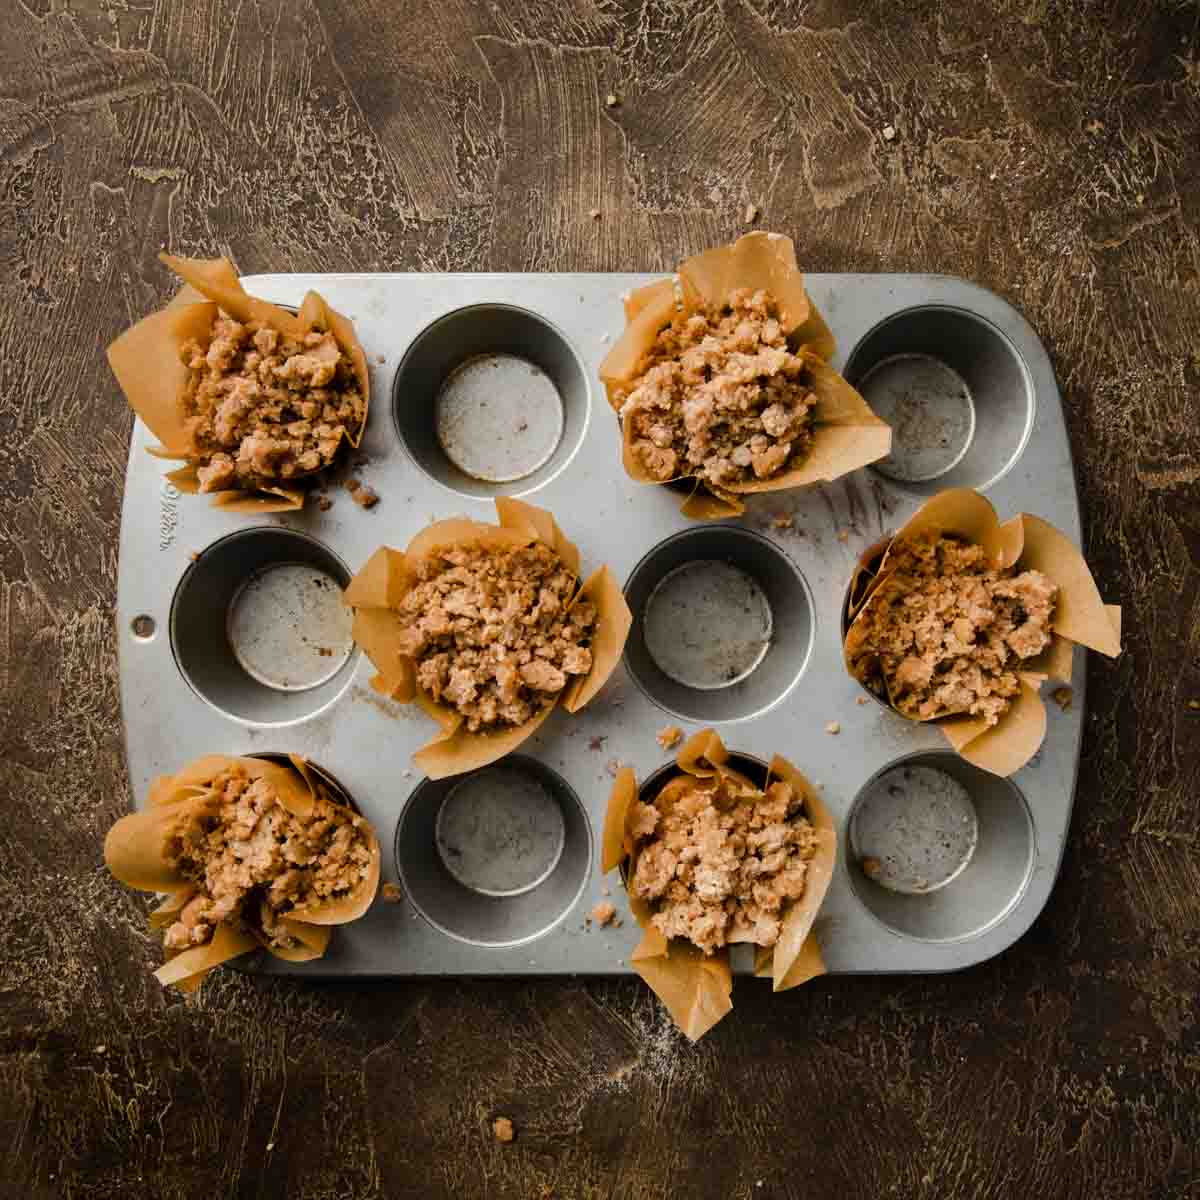 Every other muffin tin space filled with cinnamon streusel topped muffin batter